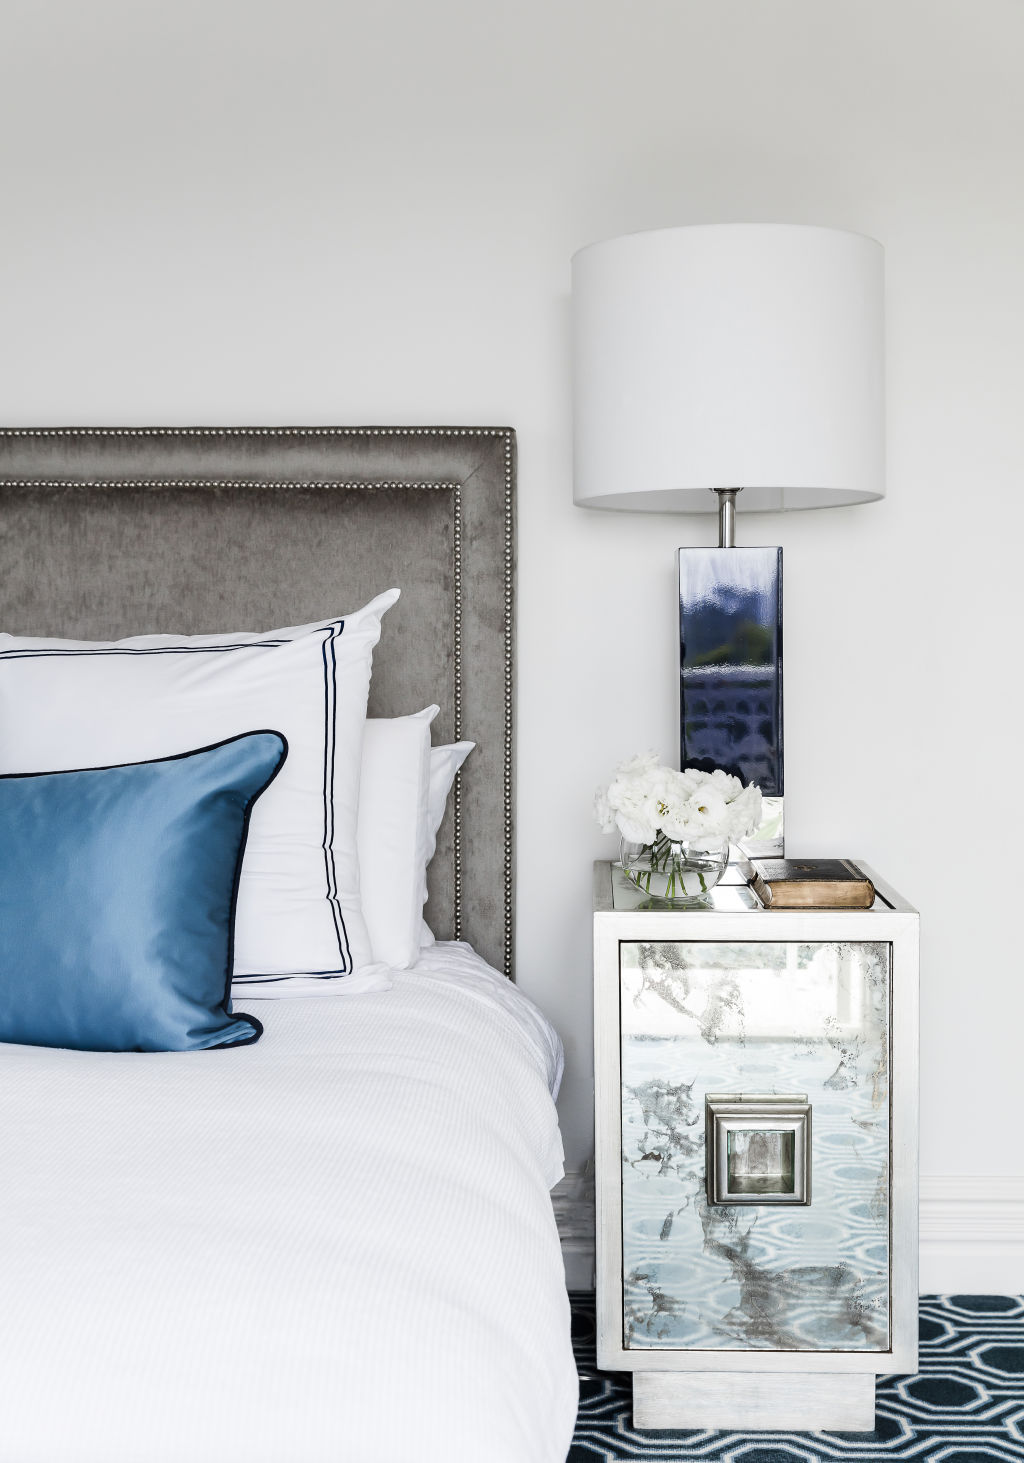 The serene main bedroom includes blue, navy and silver tones. Photo: Maree Homer